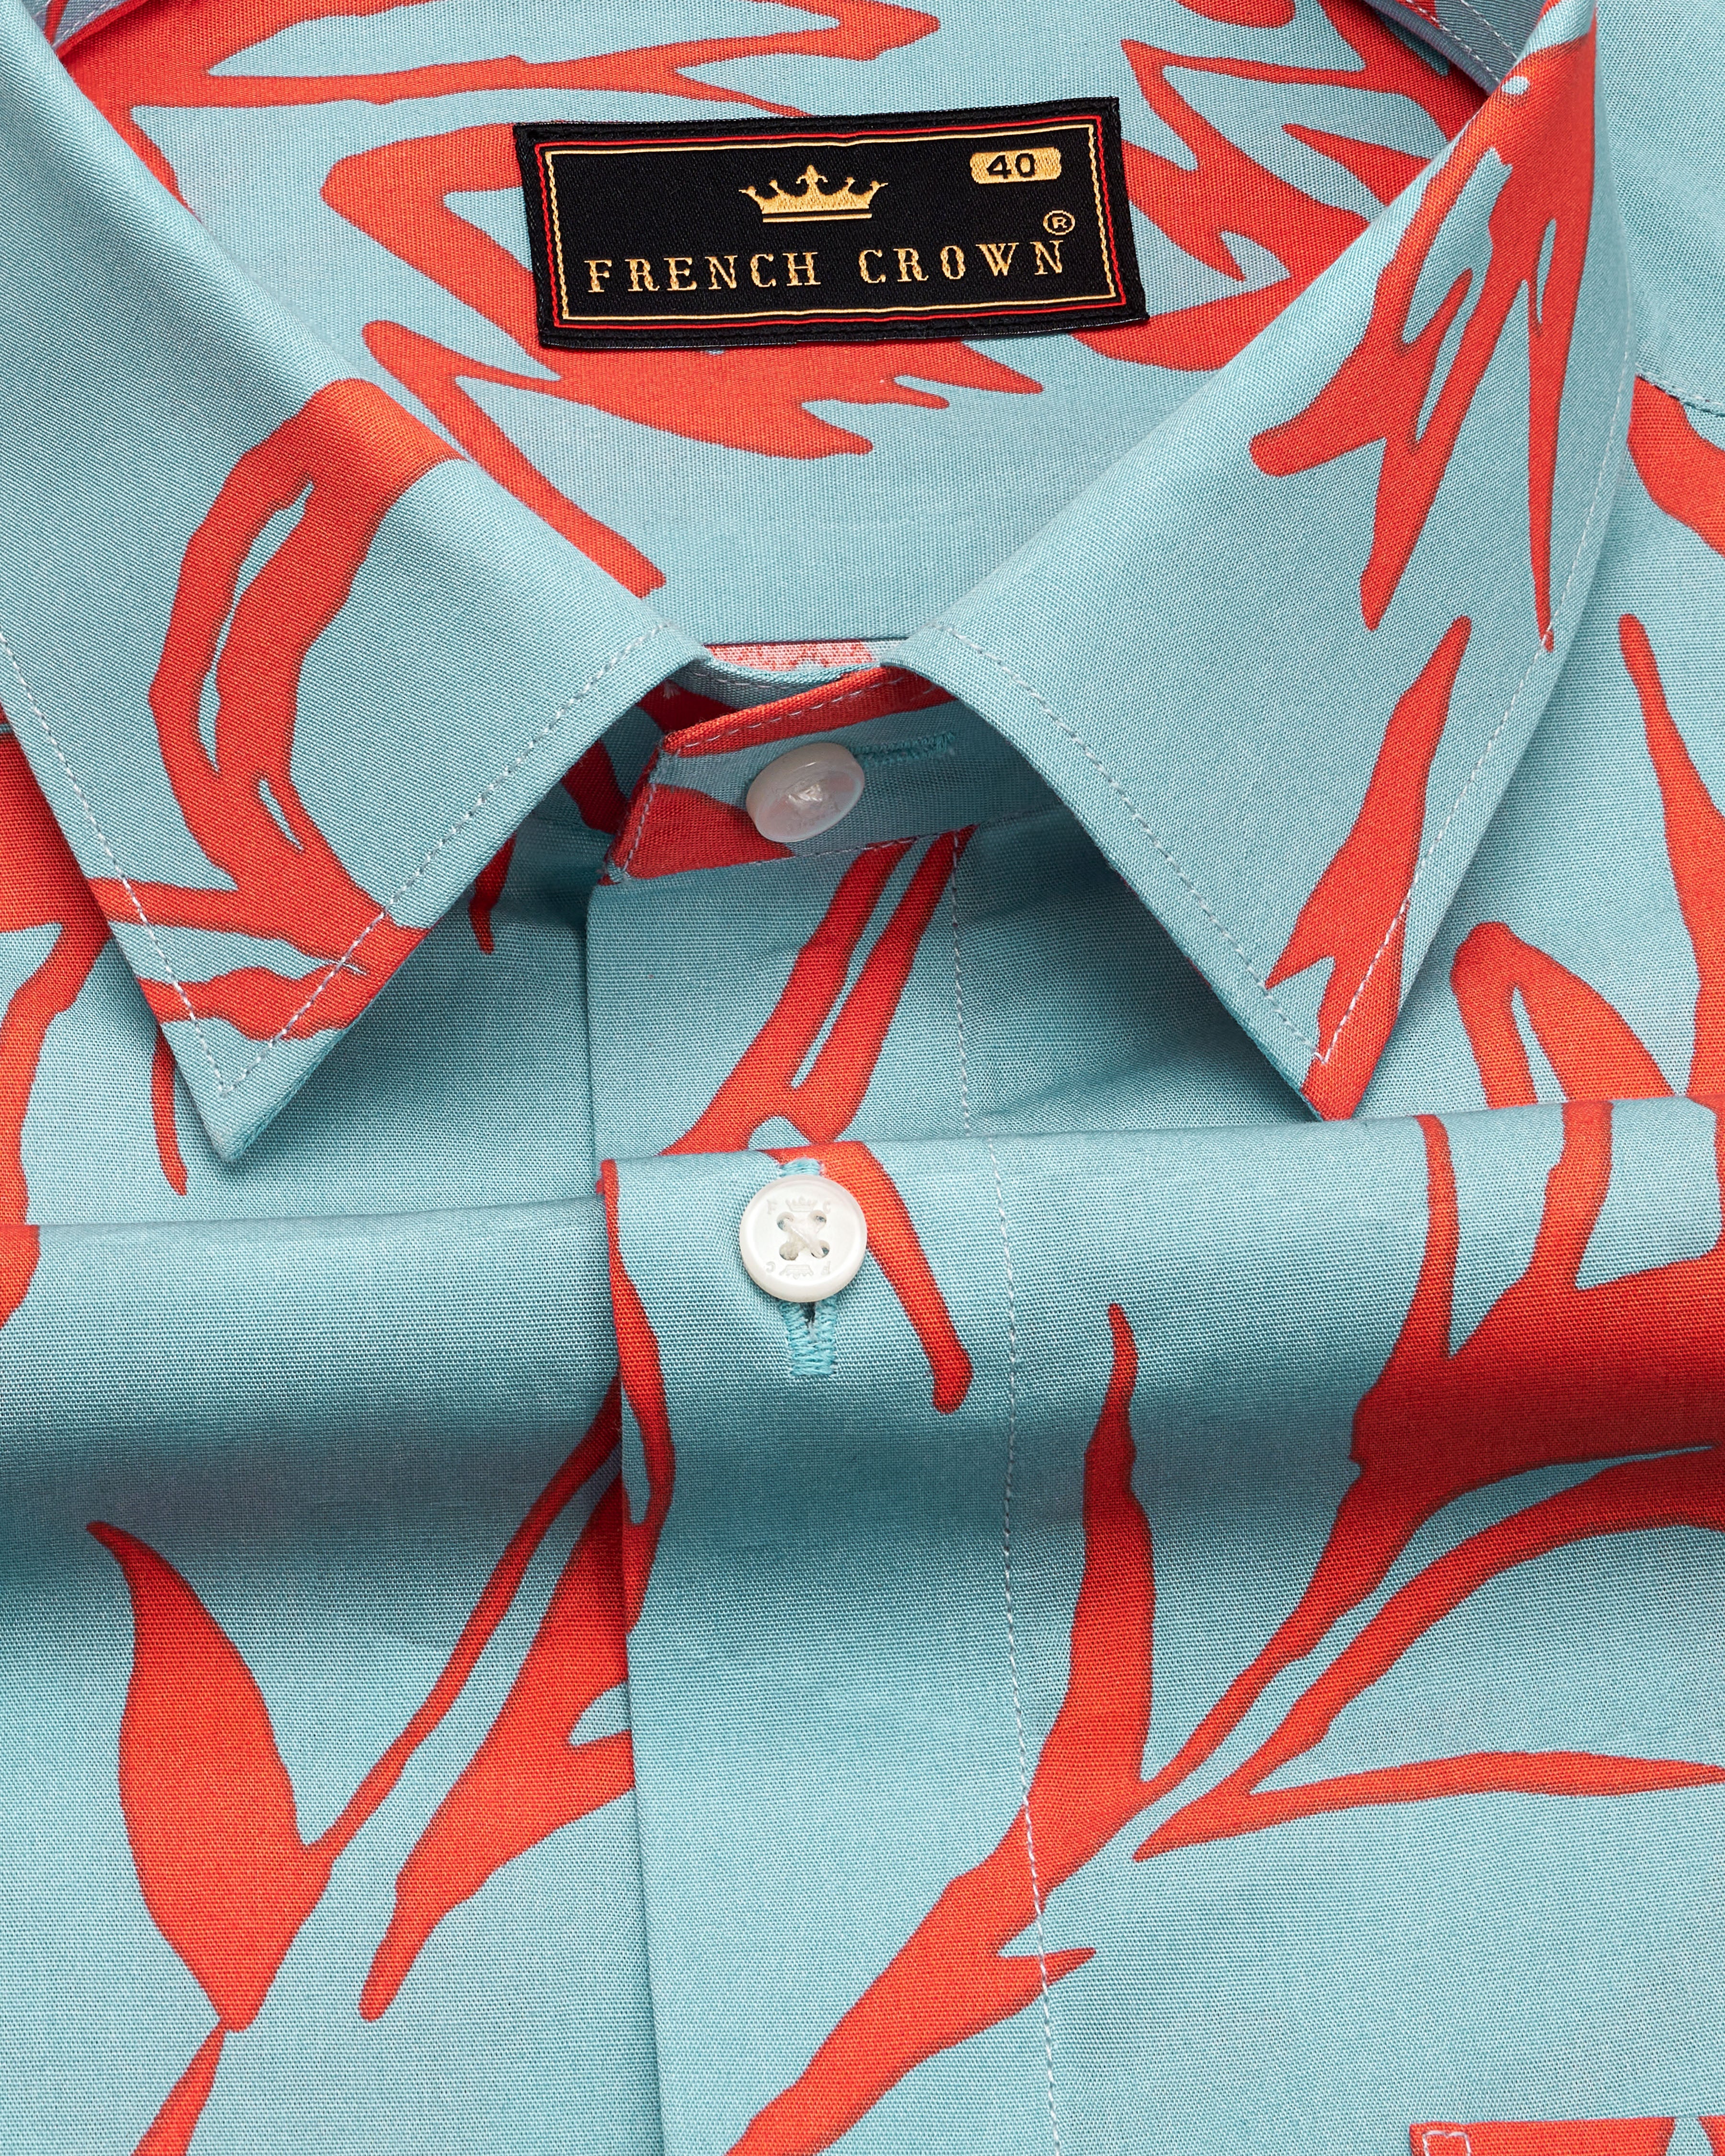 Opal Light Blue with Faded Red Printed Premium Cotton Shirt 9259-38,9259-H-38,9259-39,9259-H-39,9259-40,9259-H-40,9259-42,9259-H-42,9259-44,9259-H-44,9259-46,9259-H-46,9259-48,9259-H-48,9259-50,9259-H-50,9259-52,9259-H-52